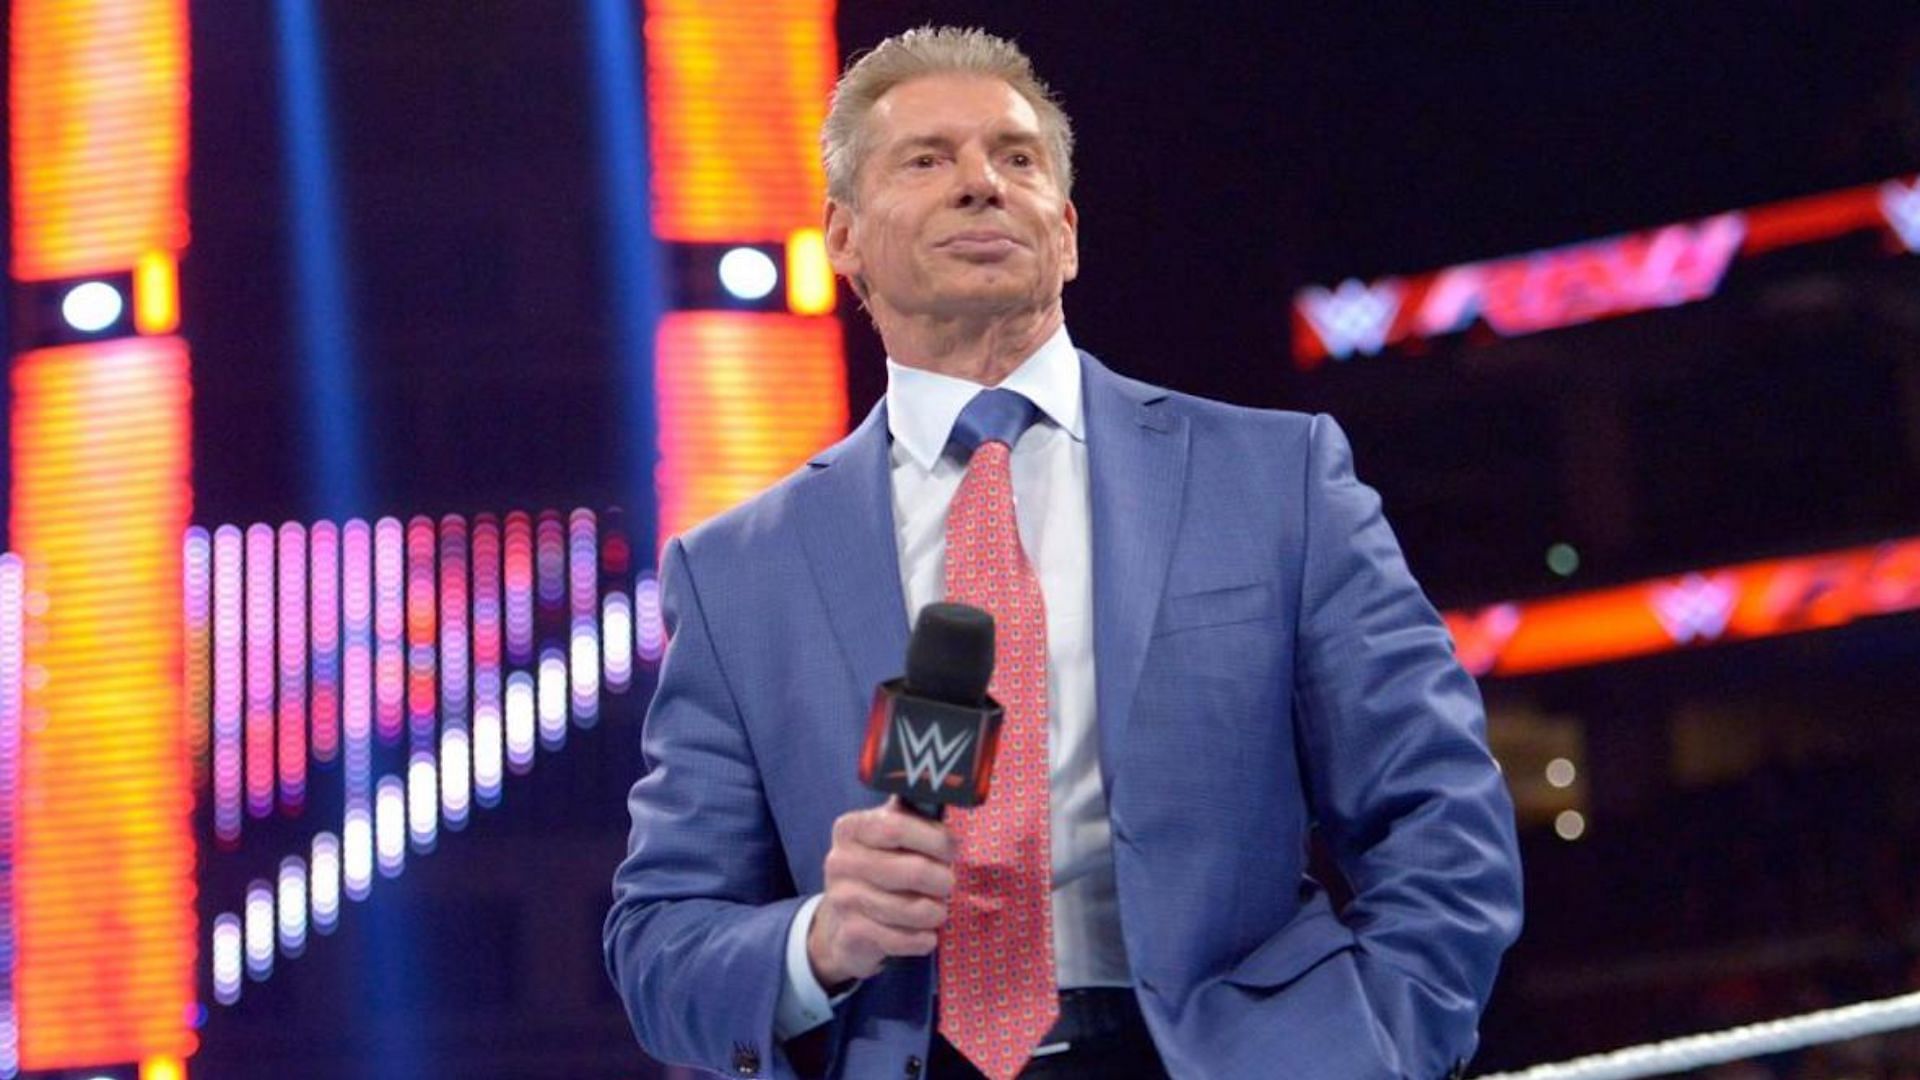 Vince shockingly announced his retirement earlier today